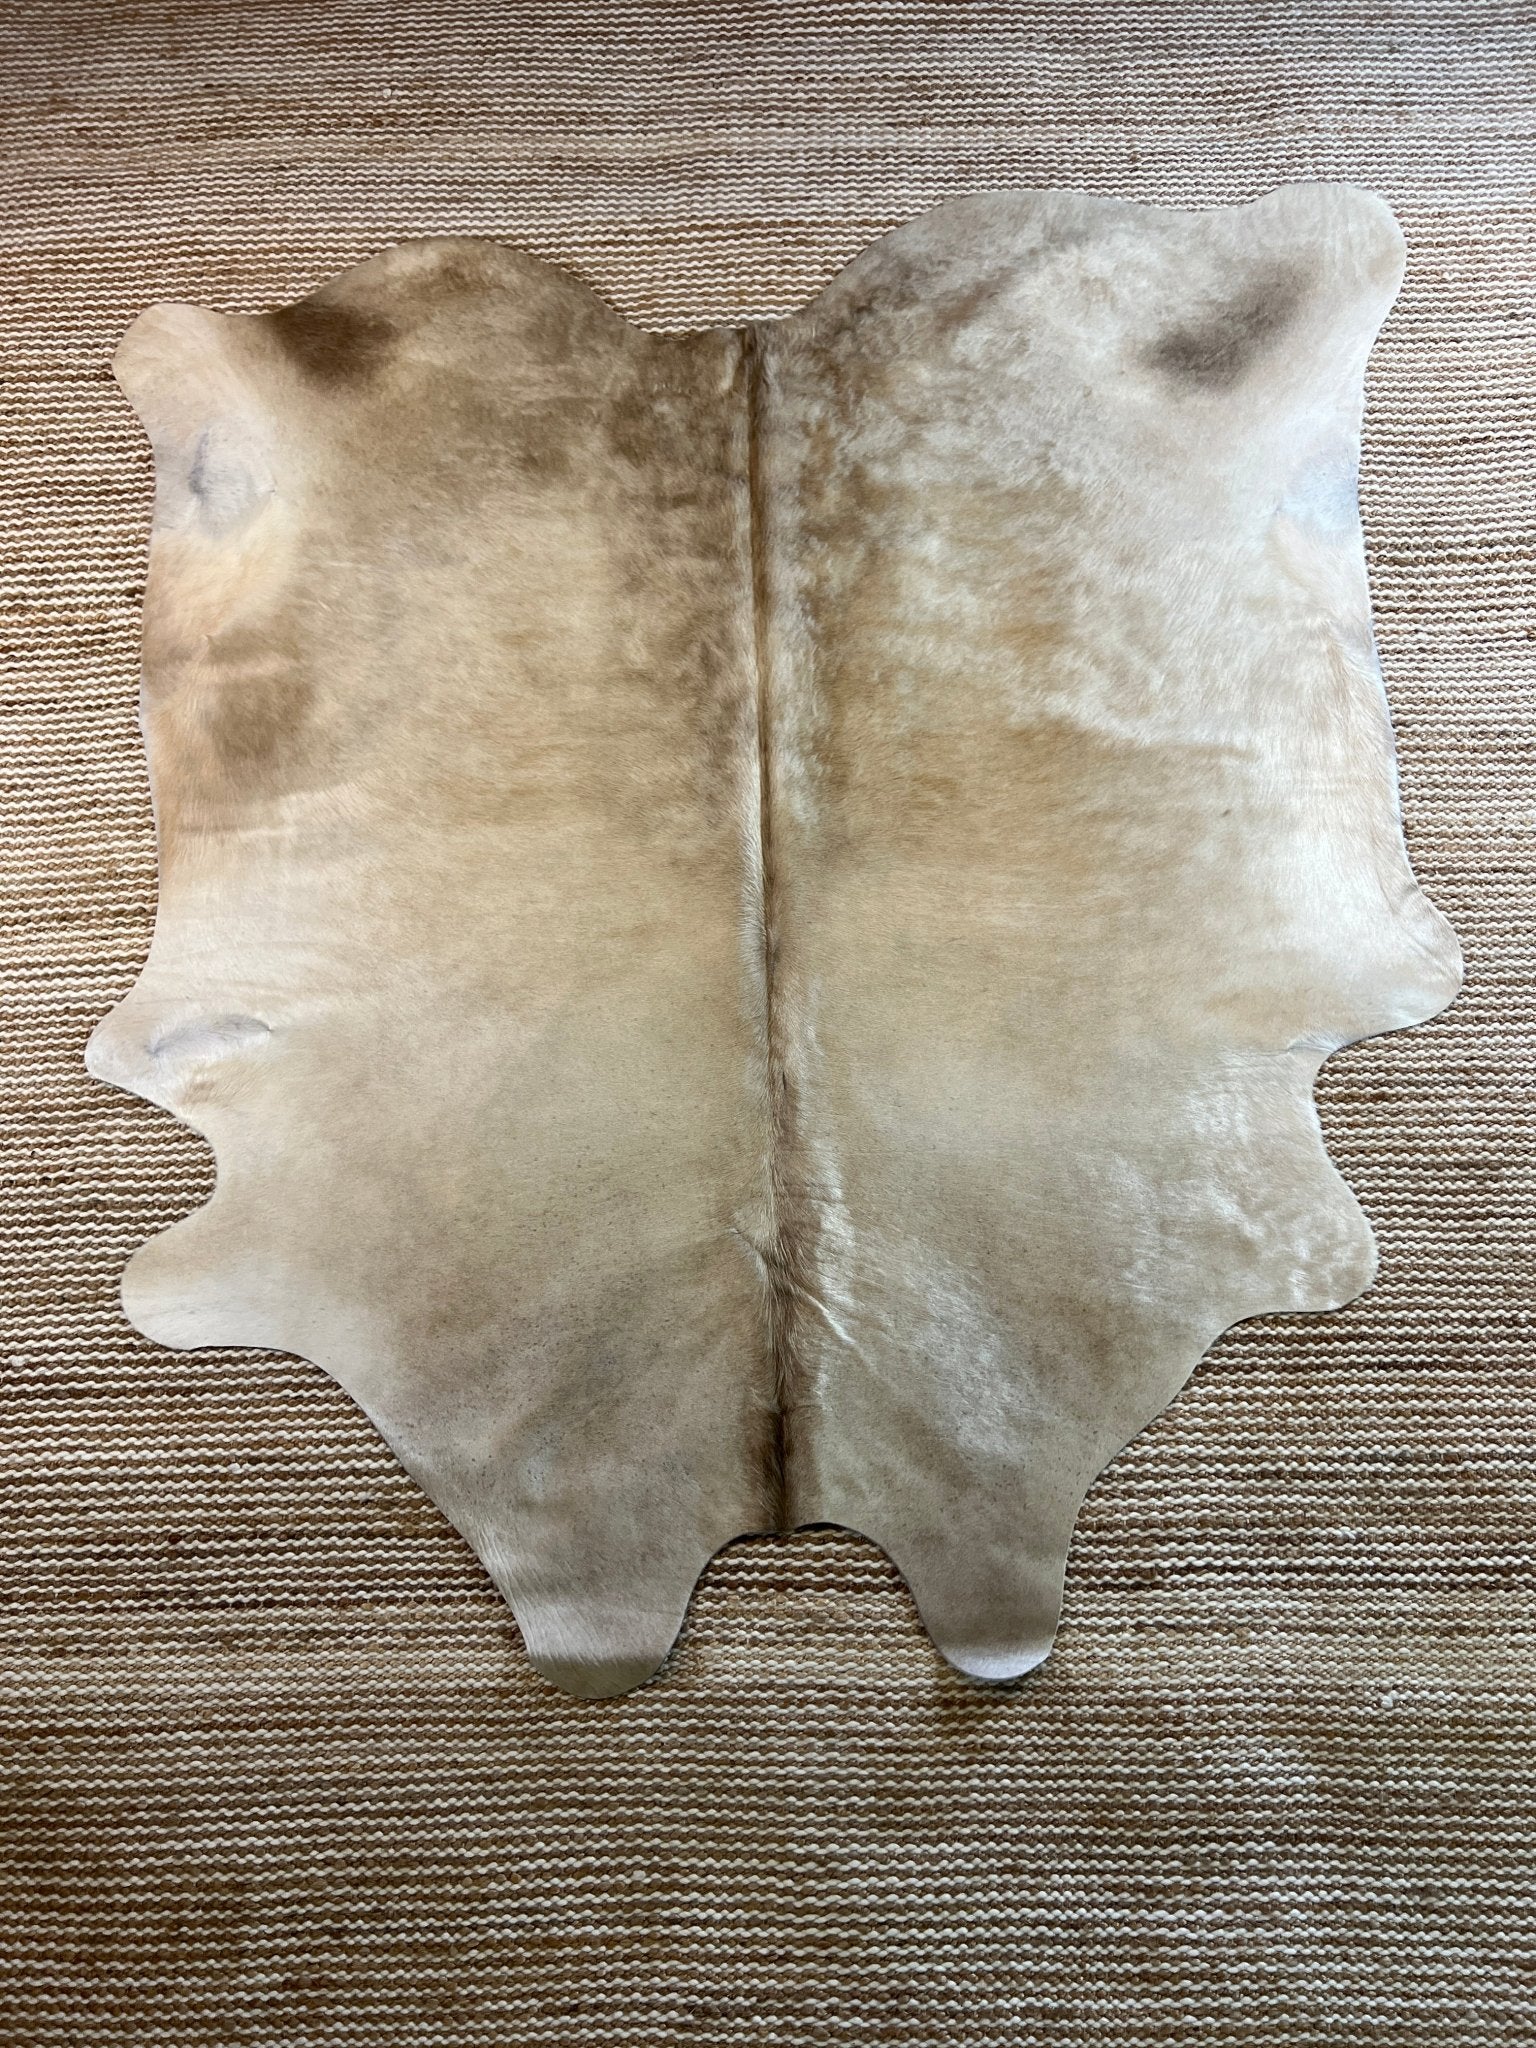 Champagne 6x6.8 Medium Cowhide Rug | Banana Manor Rug Factory Outlet